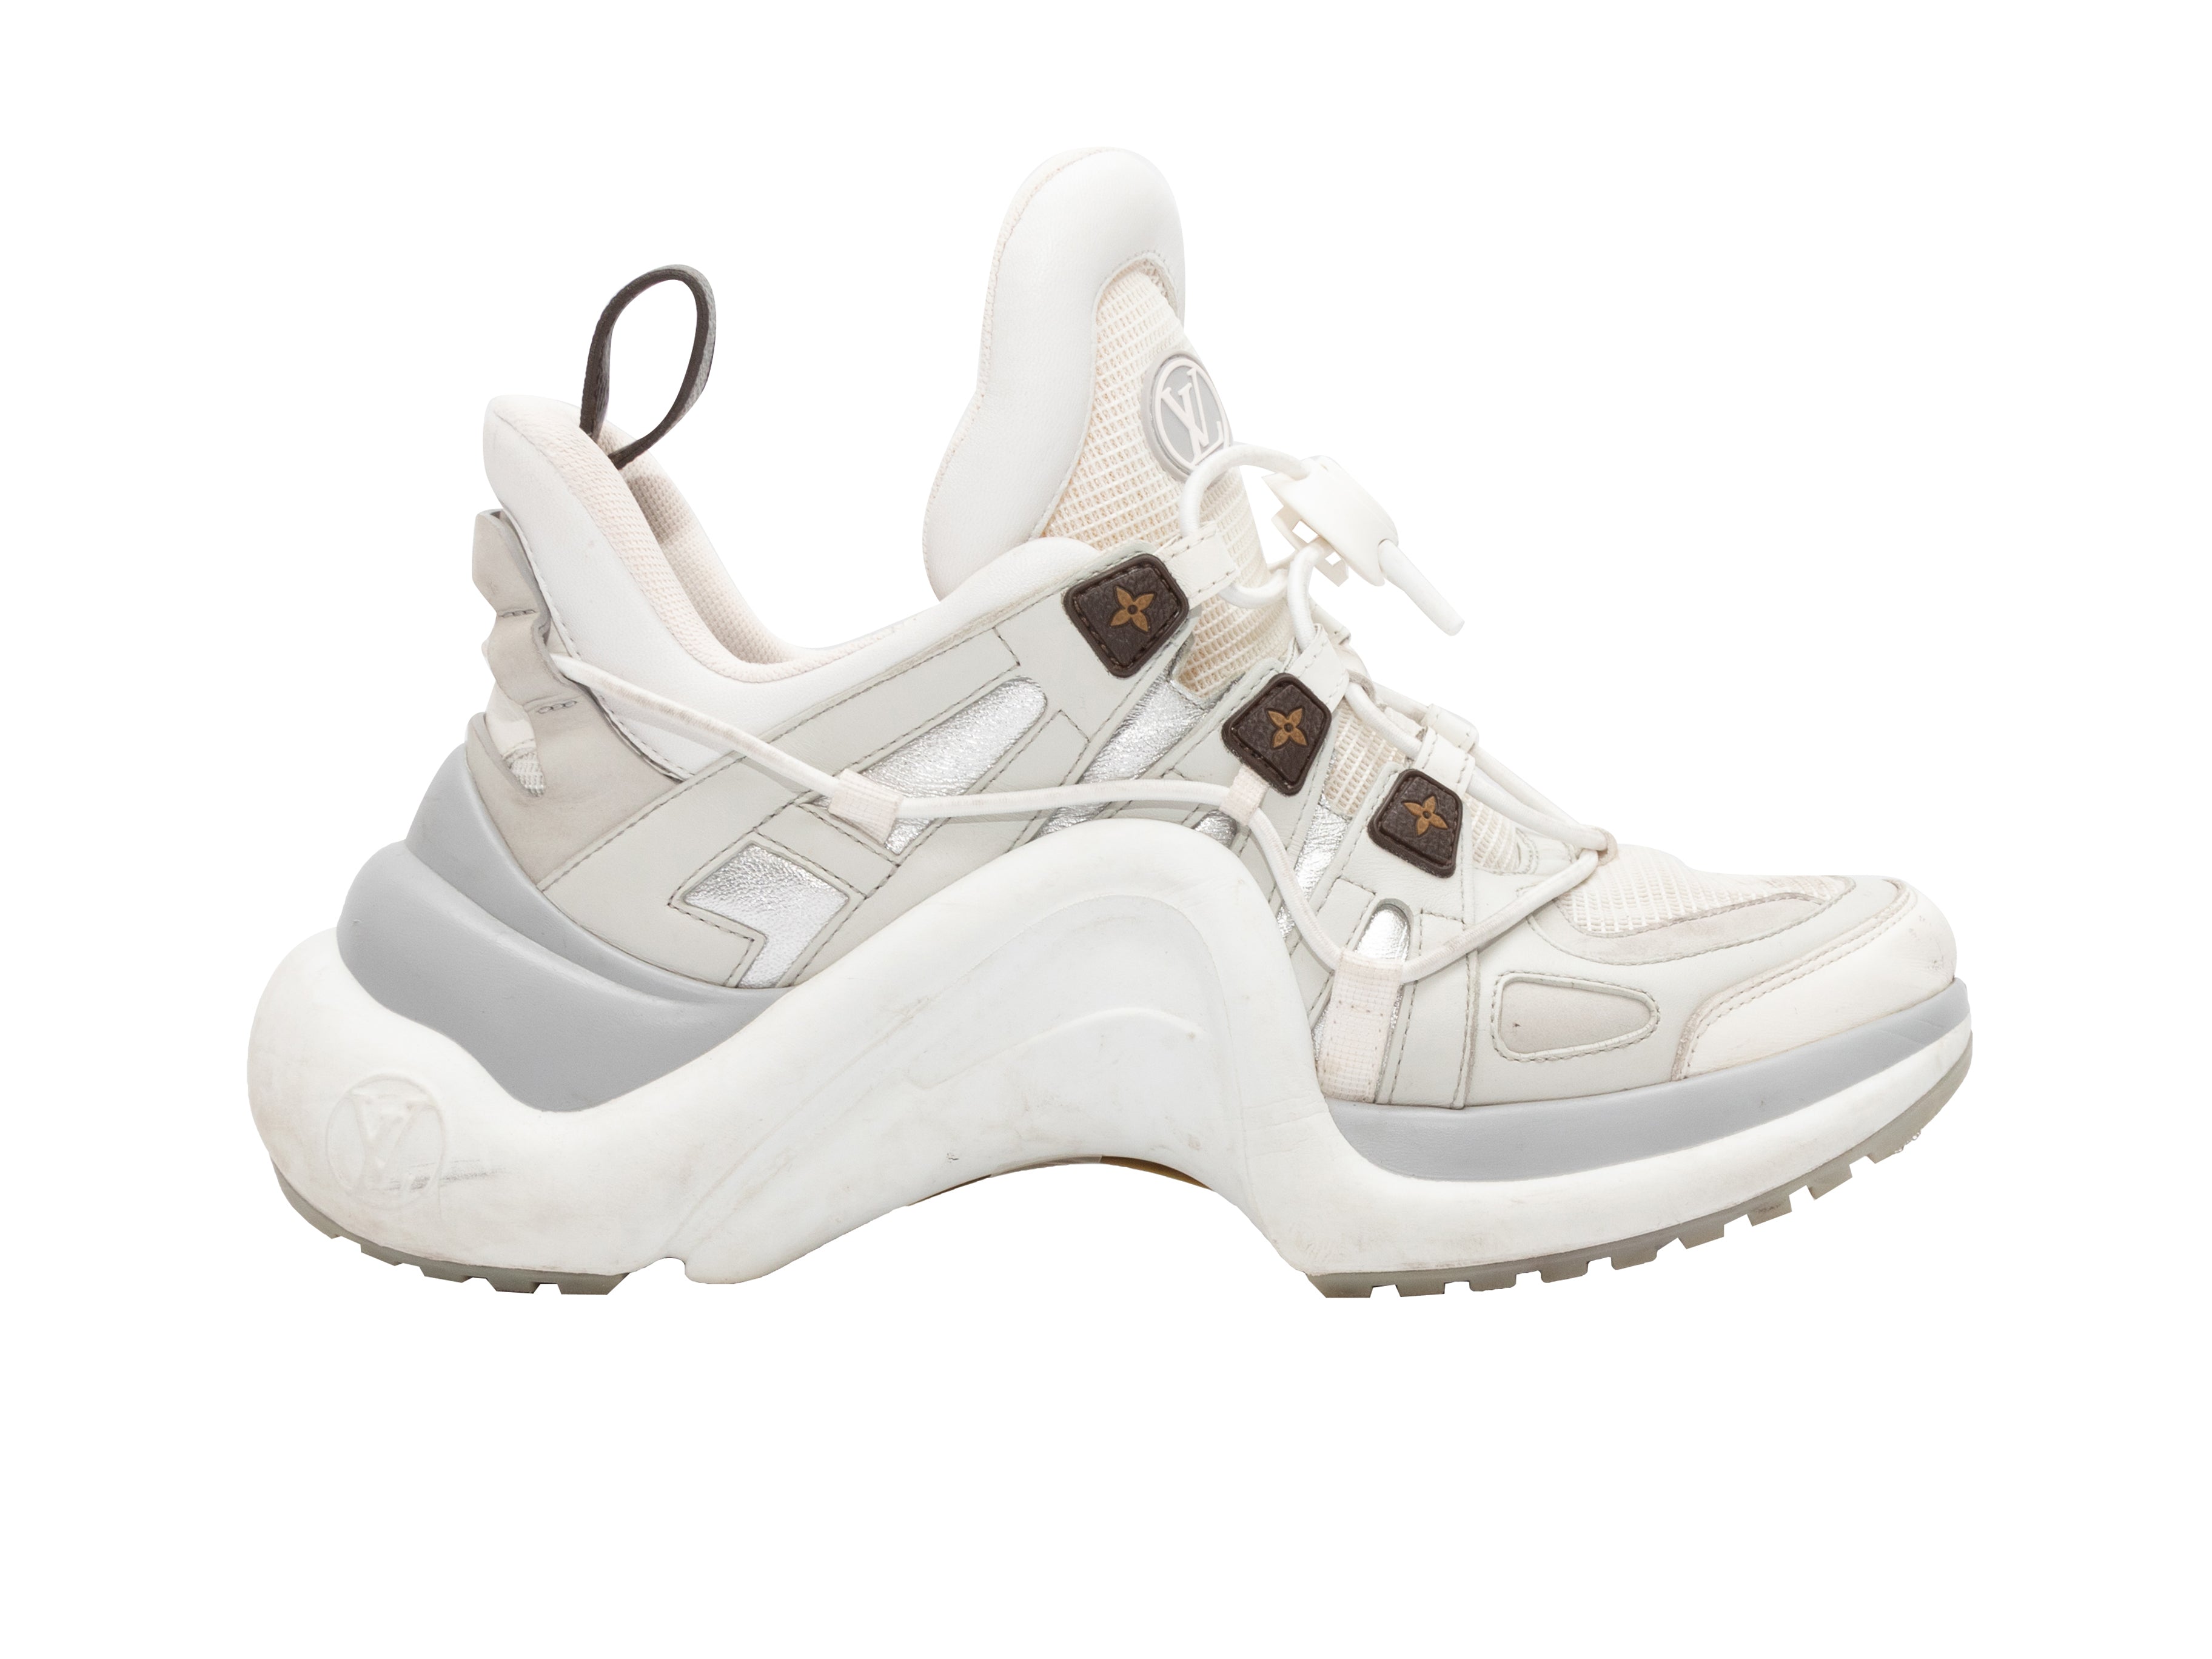 vuitton archlight silver sneakers